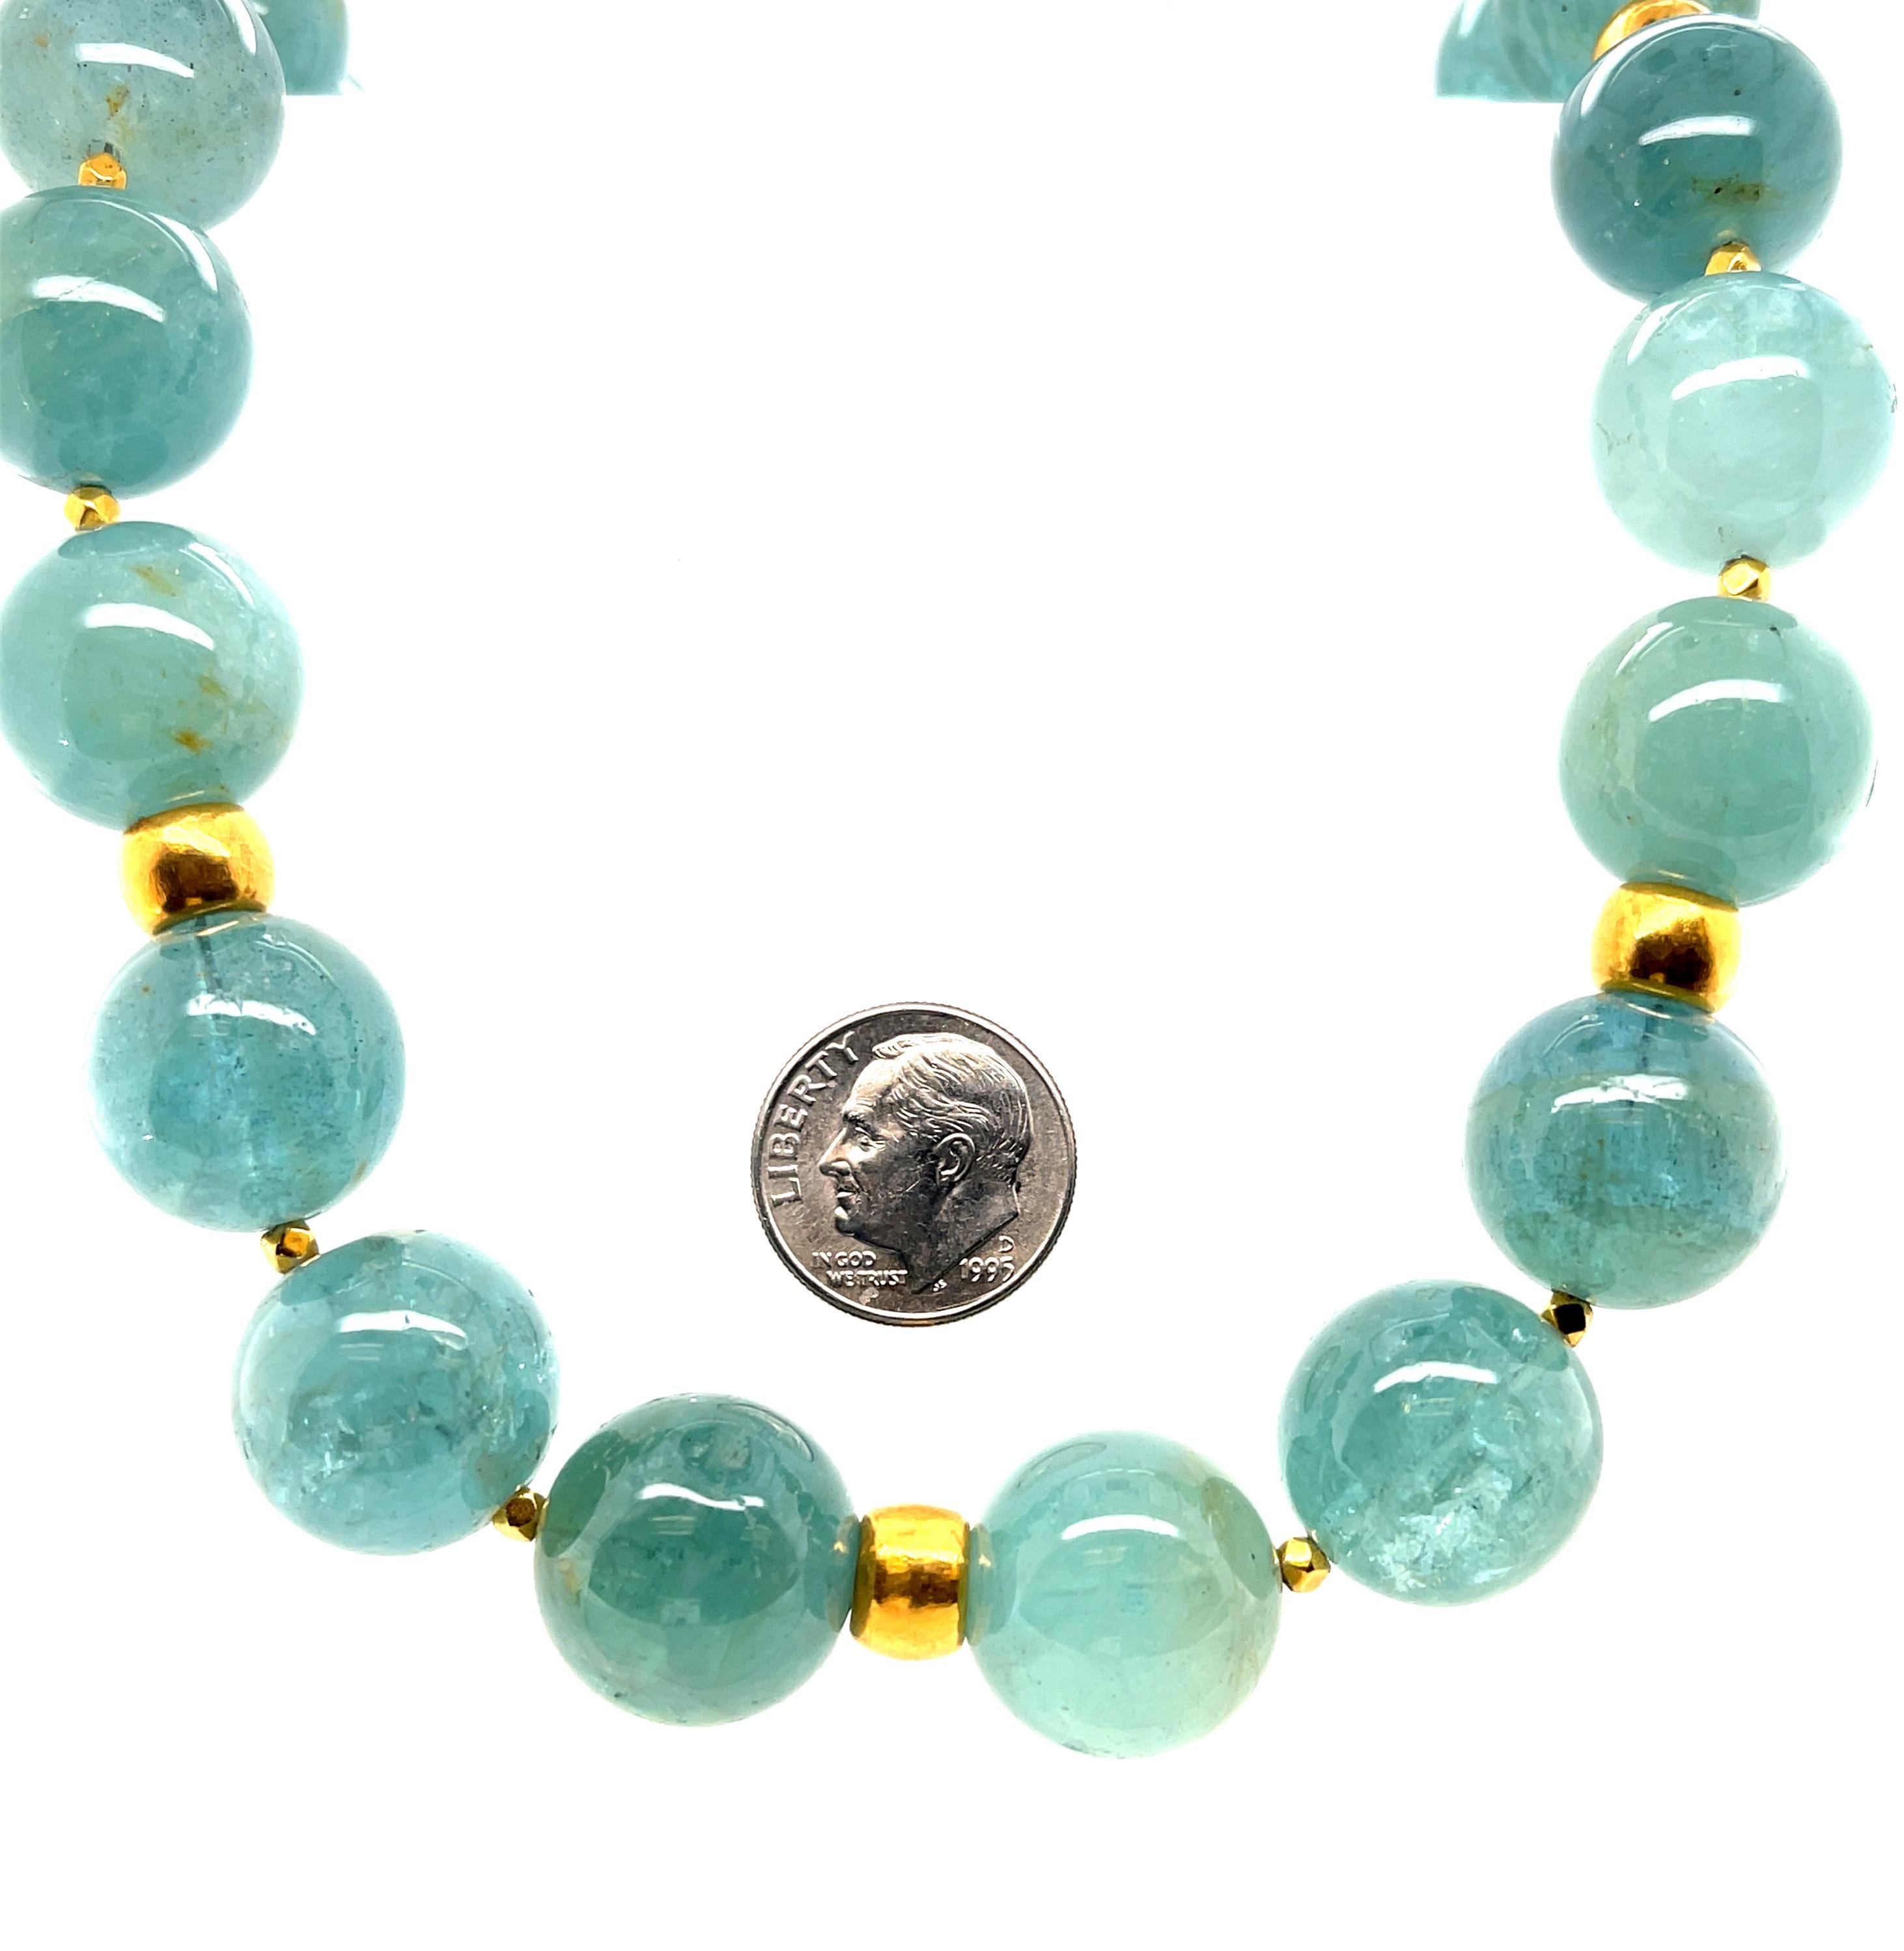 16mm Sea Foam Green Aquamarine Bead and 18k Yellow Gold Necklace, 20 Inches For Sale 1